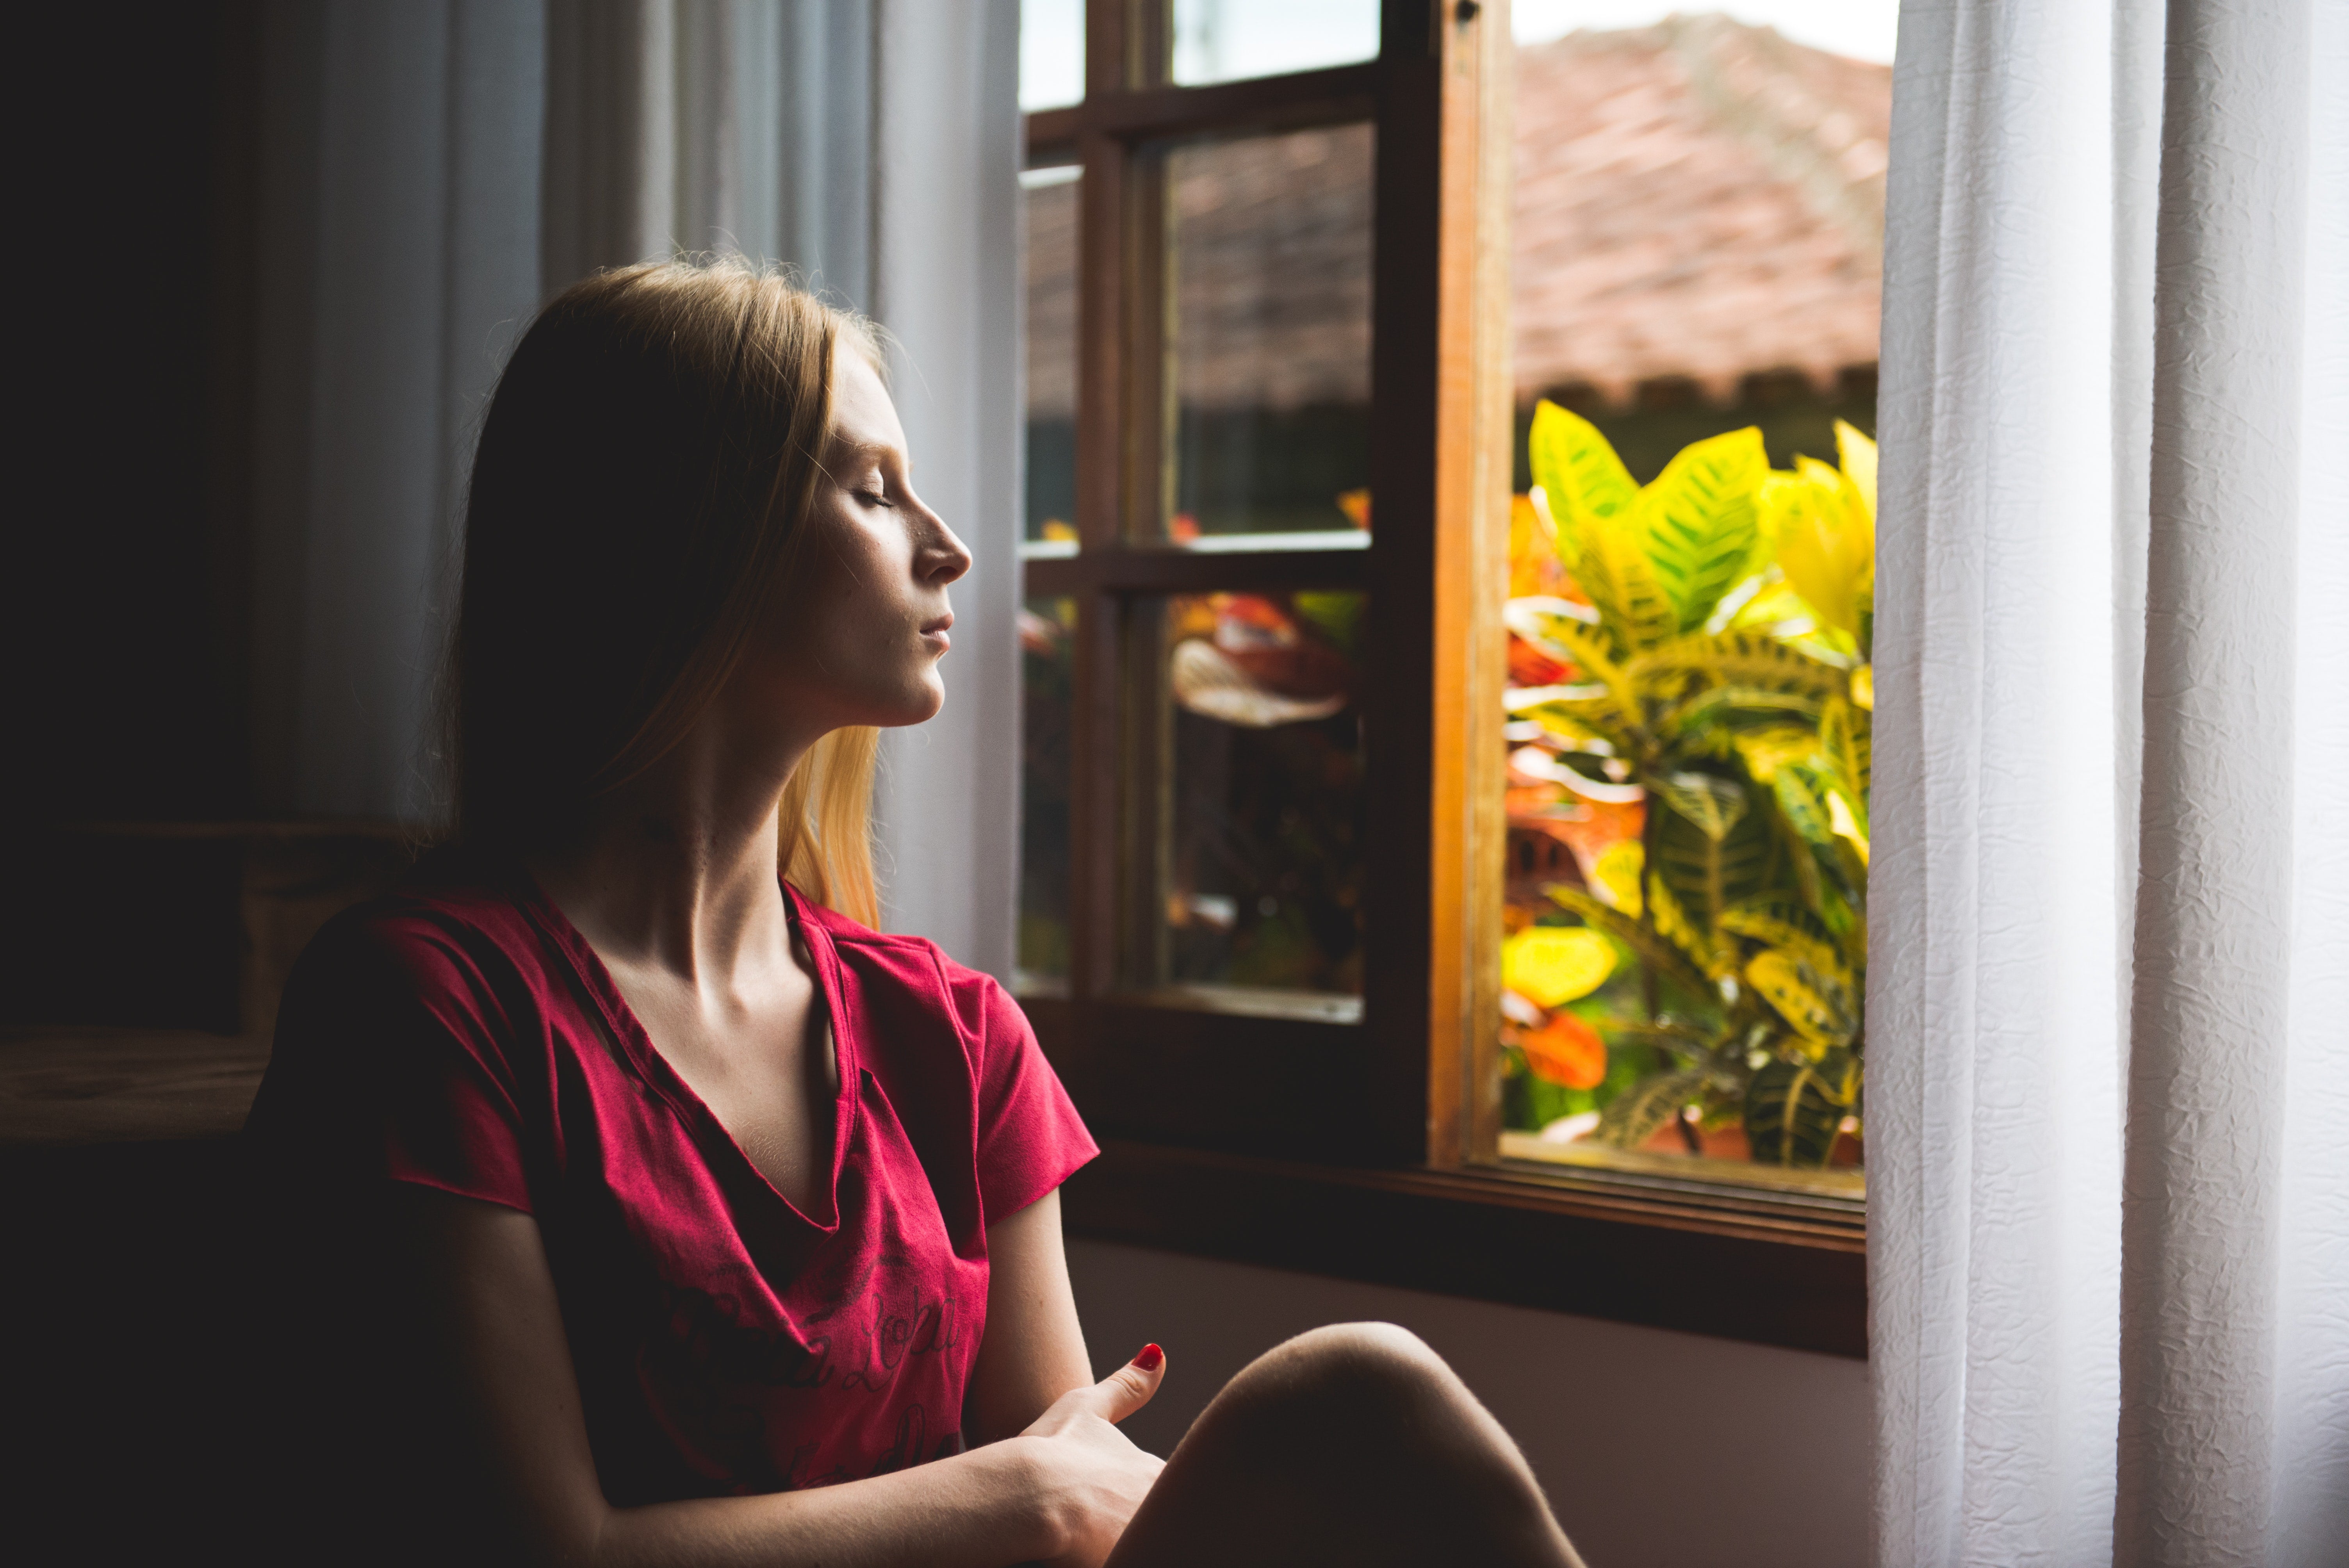 a person in mid-thought at a window